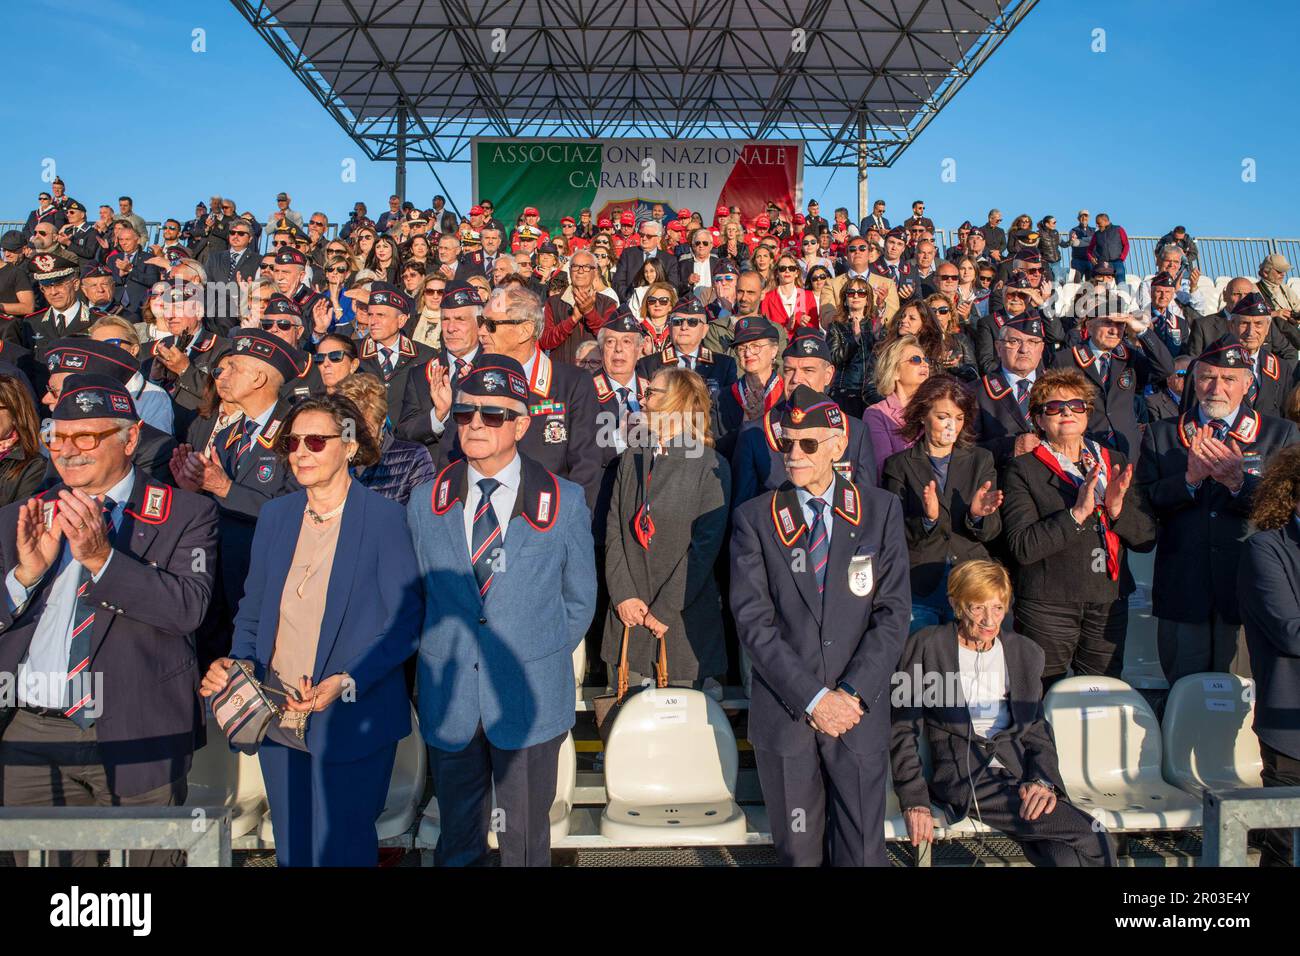 Spectators from the grandstand watch the performance of the Carabinieri on horseback during the carousel for the gathering of the National Carabinieri Association. Historic Carousel of the 4th Carabinieri Regiment on Horseback in Ostia Lido to inaugurate the 25th National Gathering of the National Carabinieri Association (ANC). The event, which returns after a 4-year break, thanks to Covid, was organized by the Association, established in 1886, which brings together carabinieri on duty, on leave and their family members, has over 180 thousand members, 250 group volunteers and 164 civil protect Stock Photo